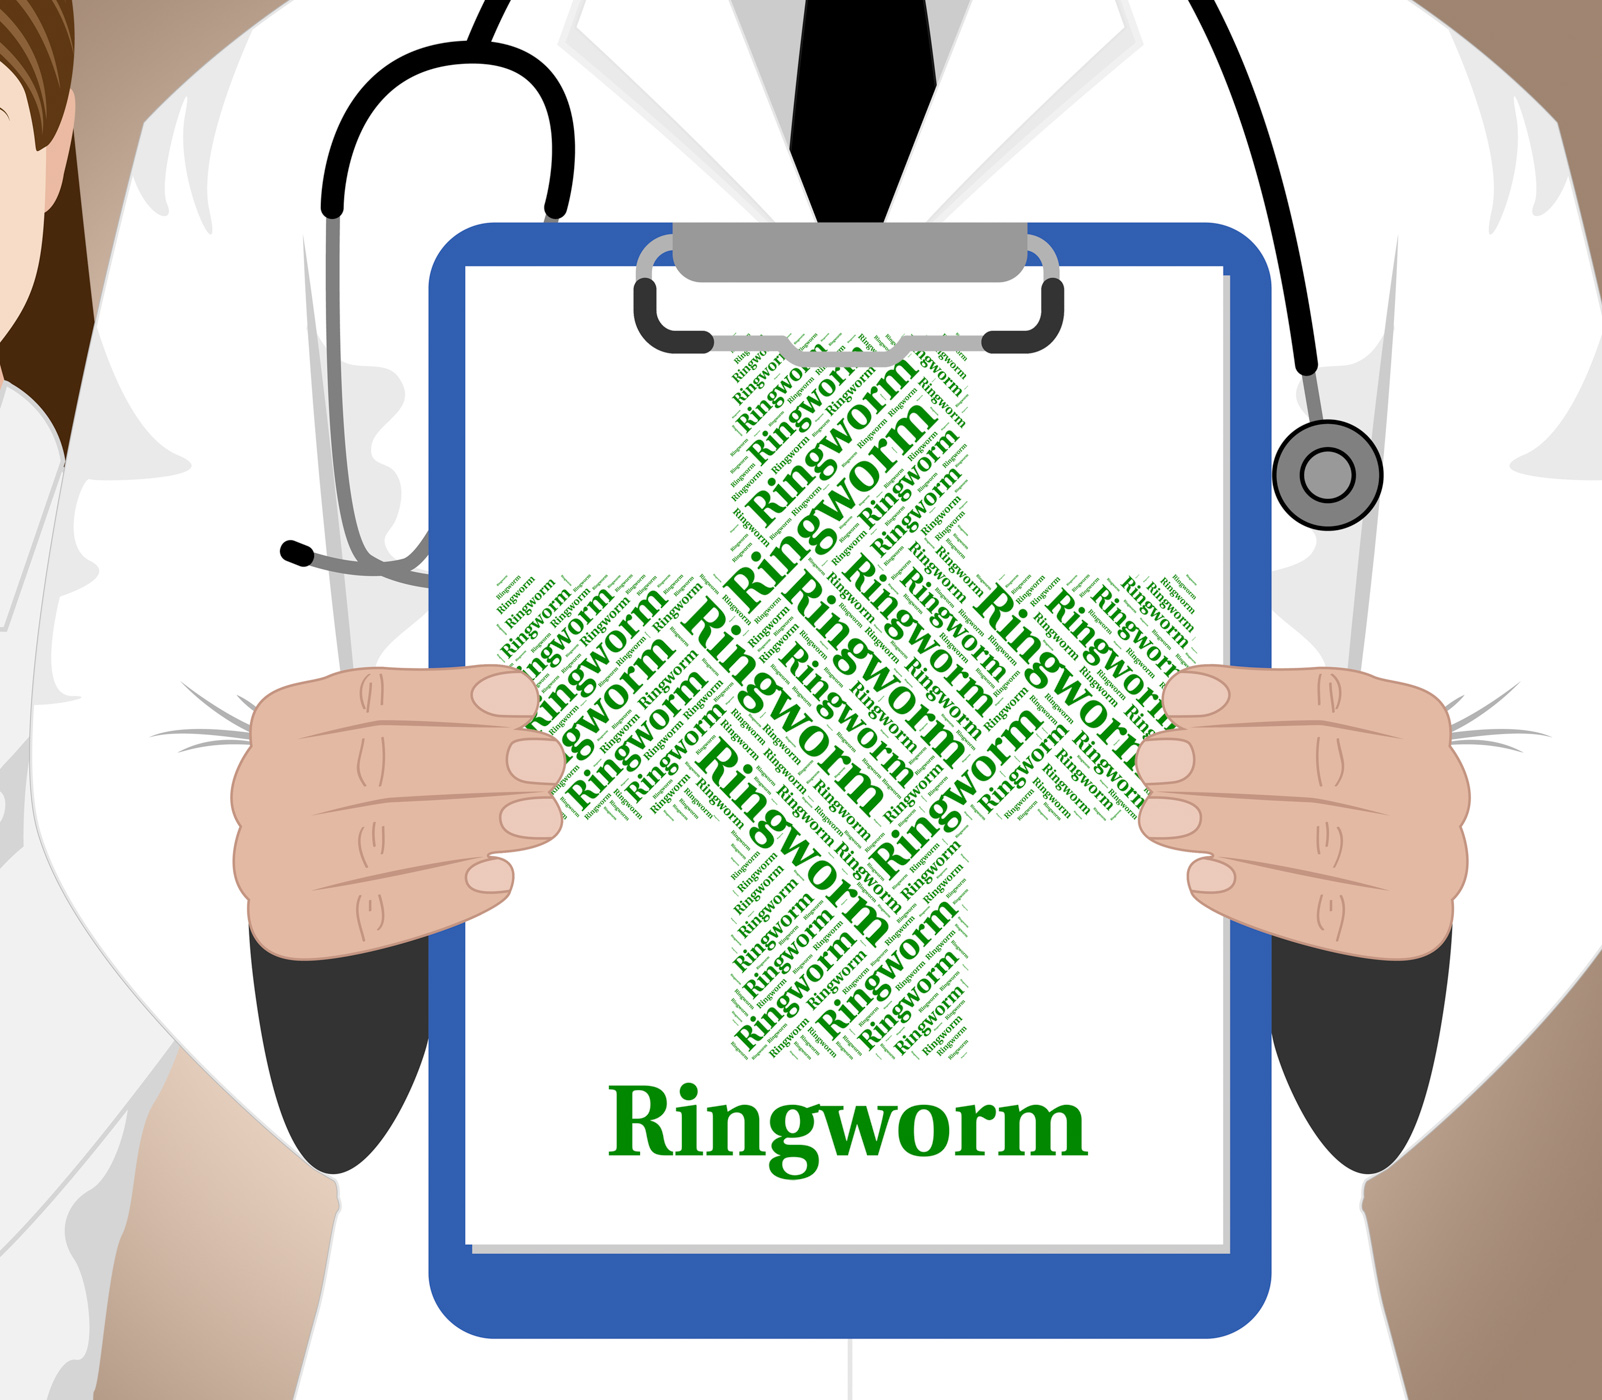 Ringworm word means poor health and afflictions photo